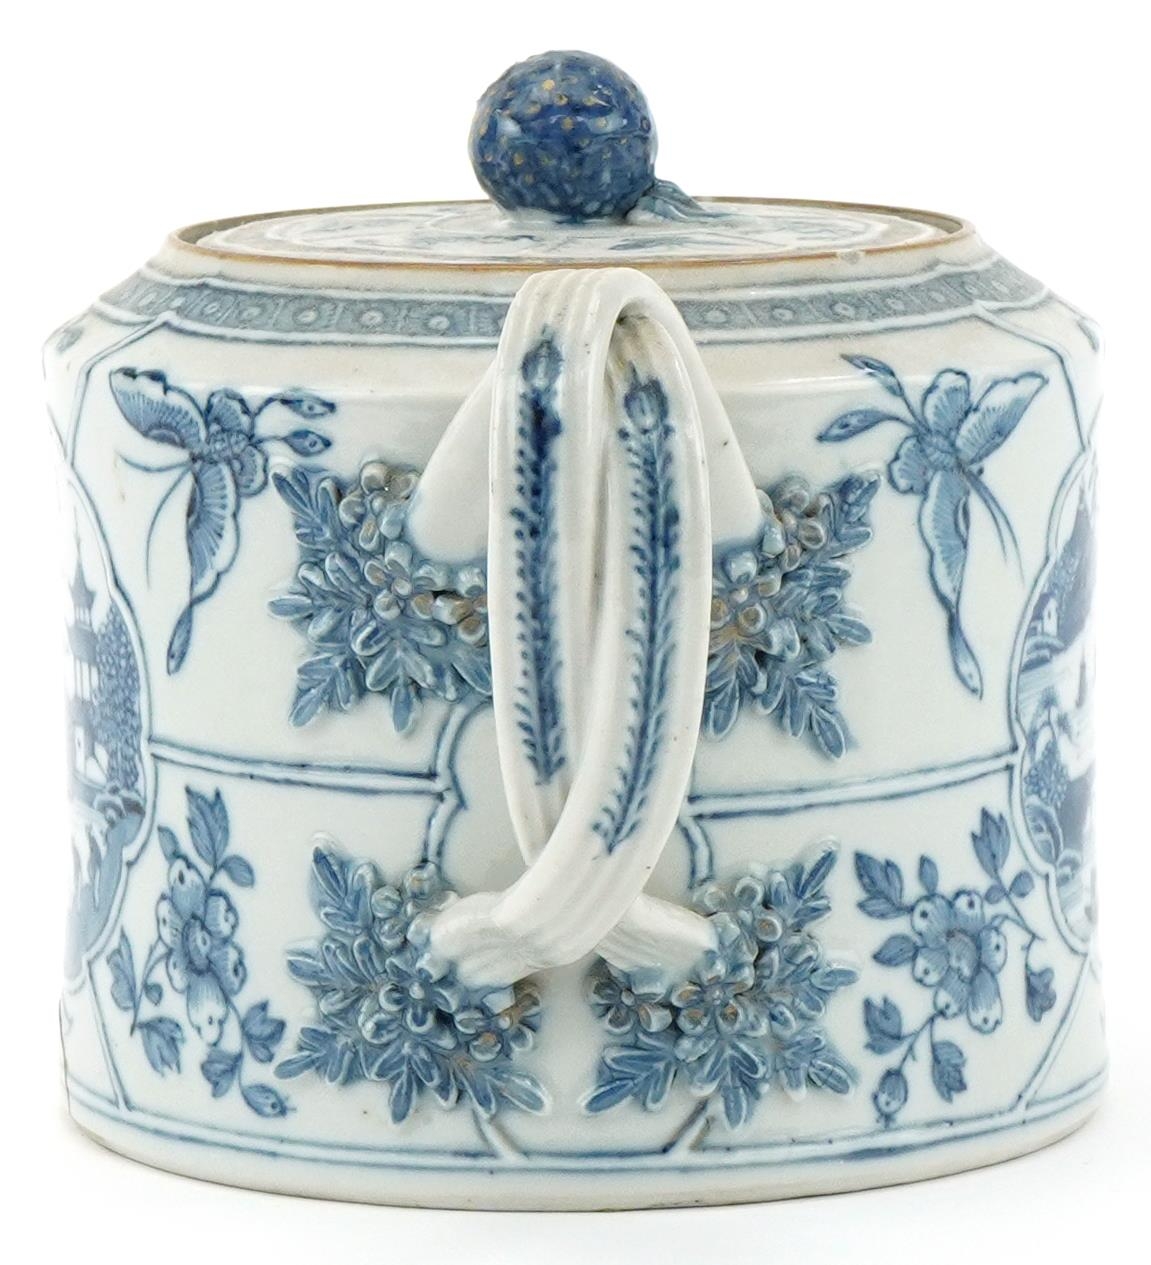 18th century Chinese porcelain teapot hand painted in the Willow pattern, 14cm high - Image 3 of 7